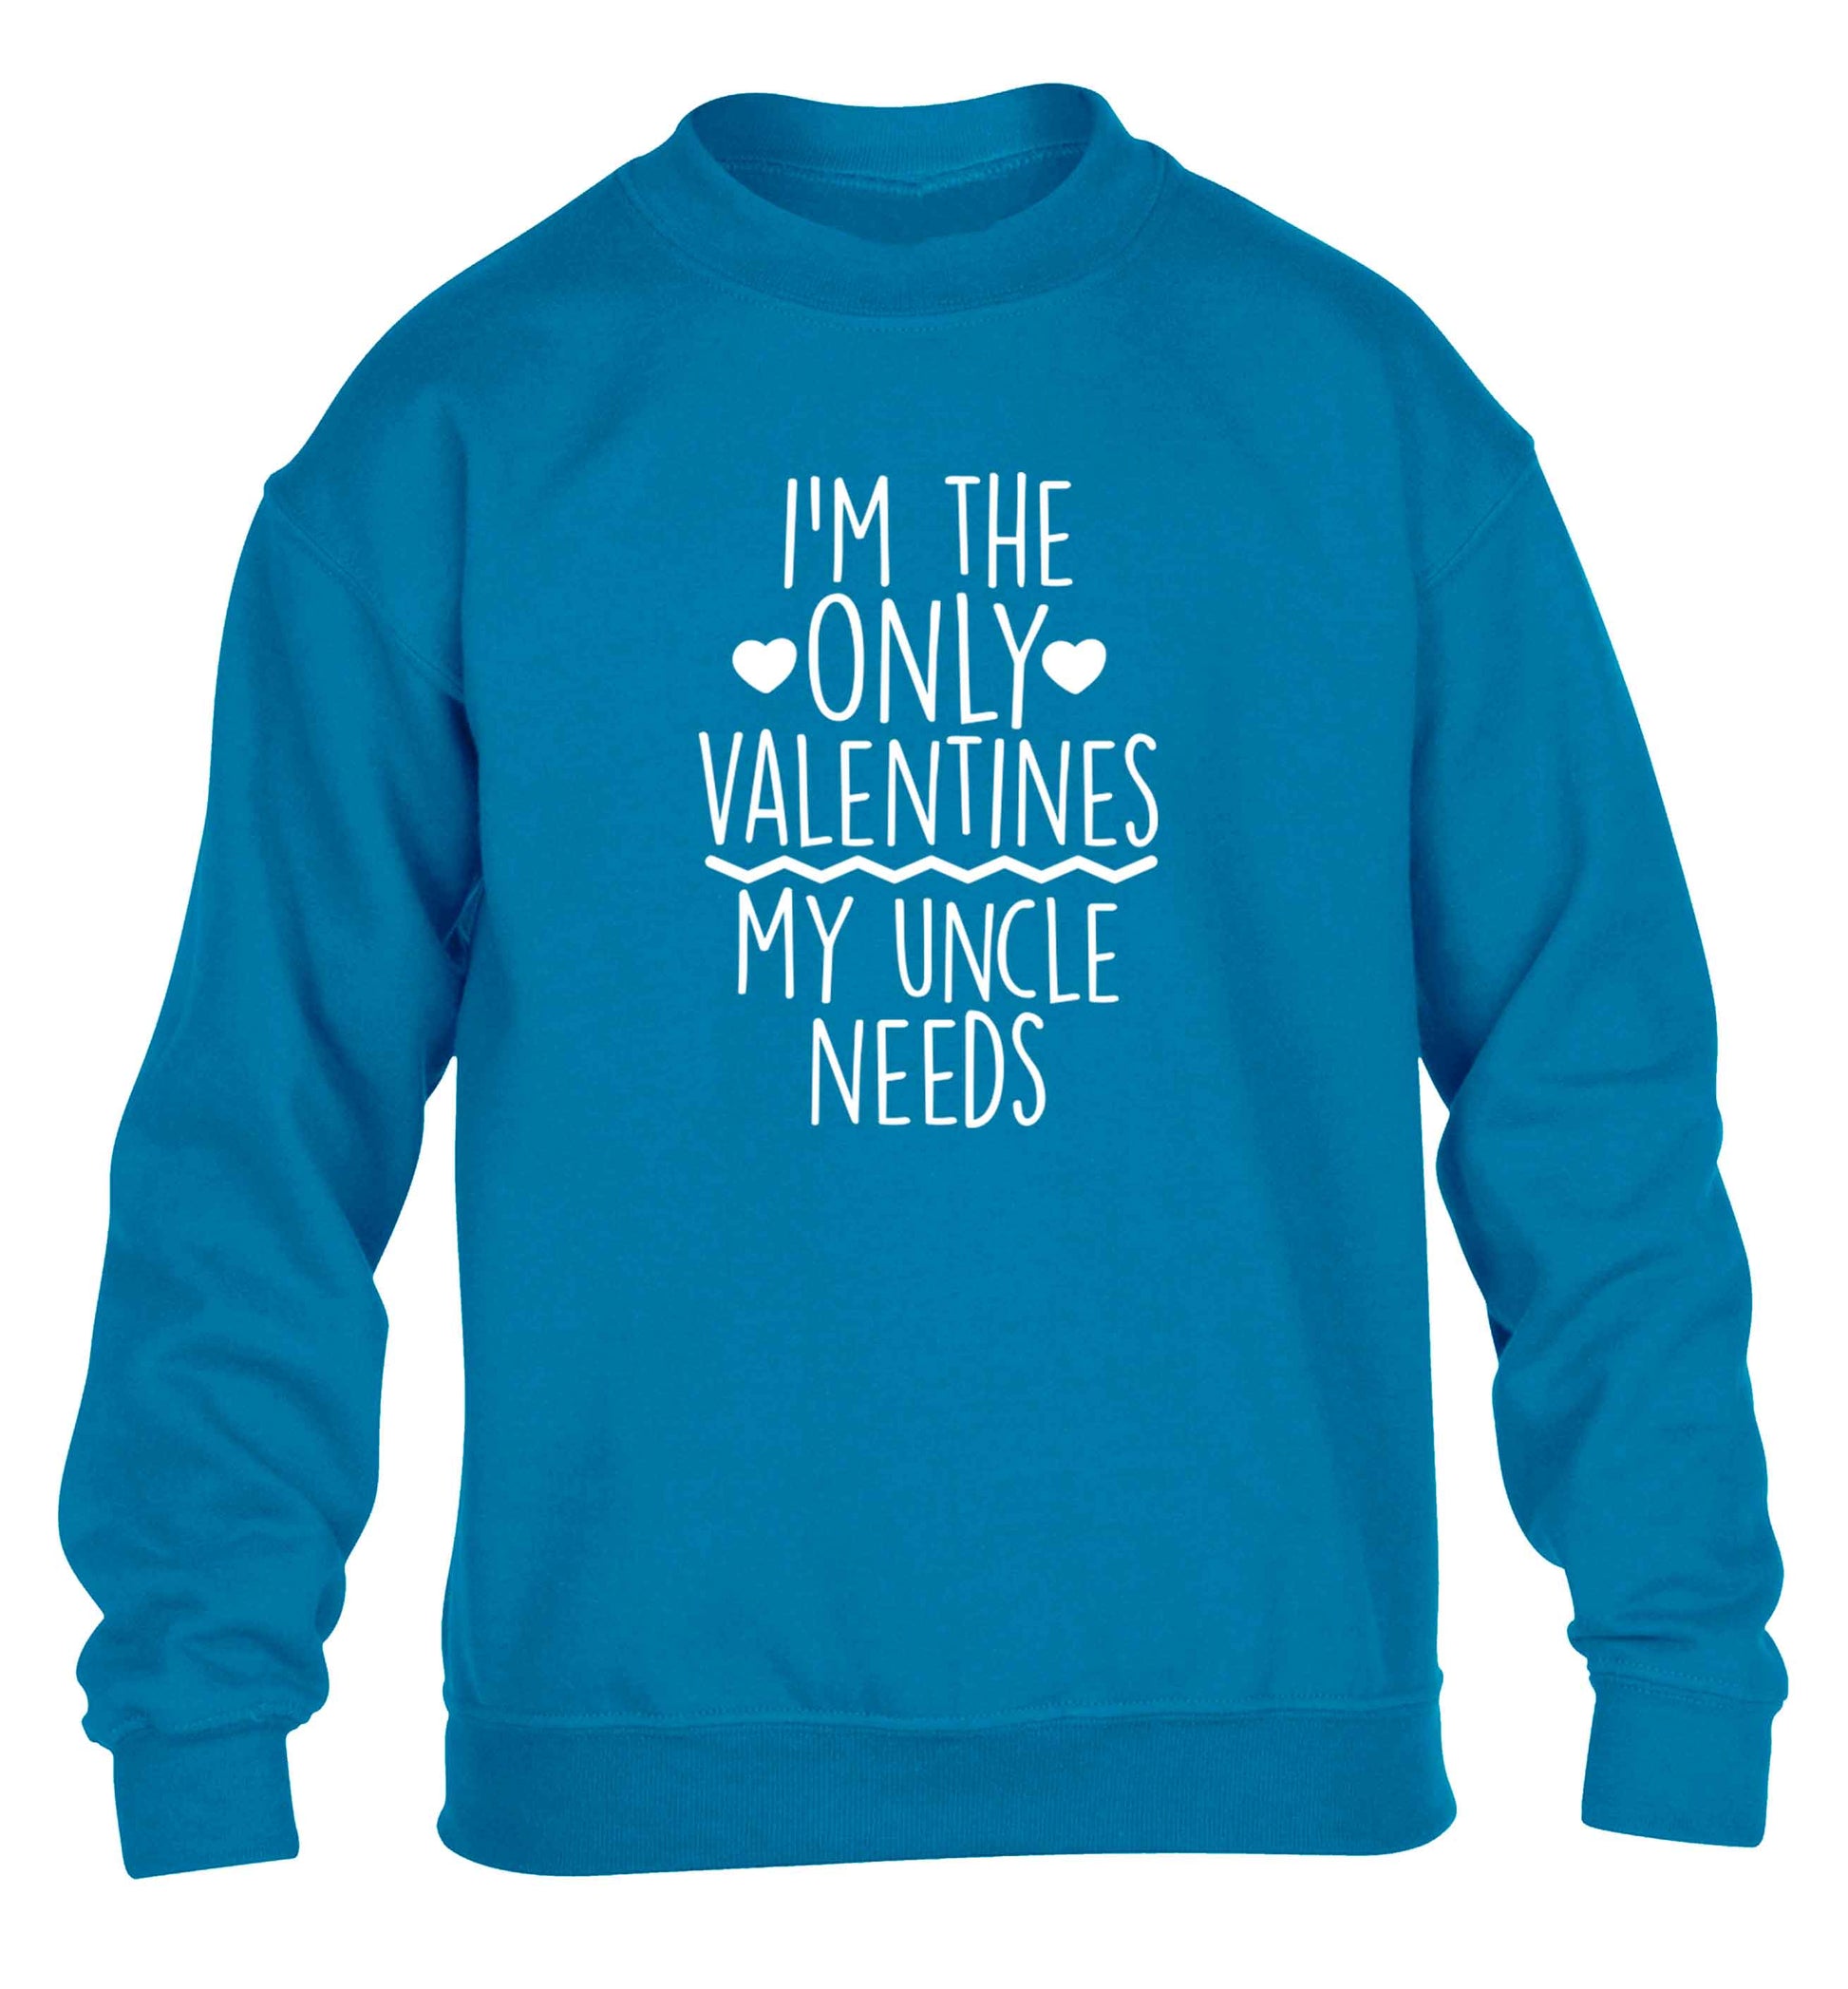 I'm the only valentines my uncle needs children's blue sweater 12-13 Years